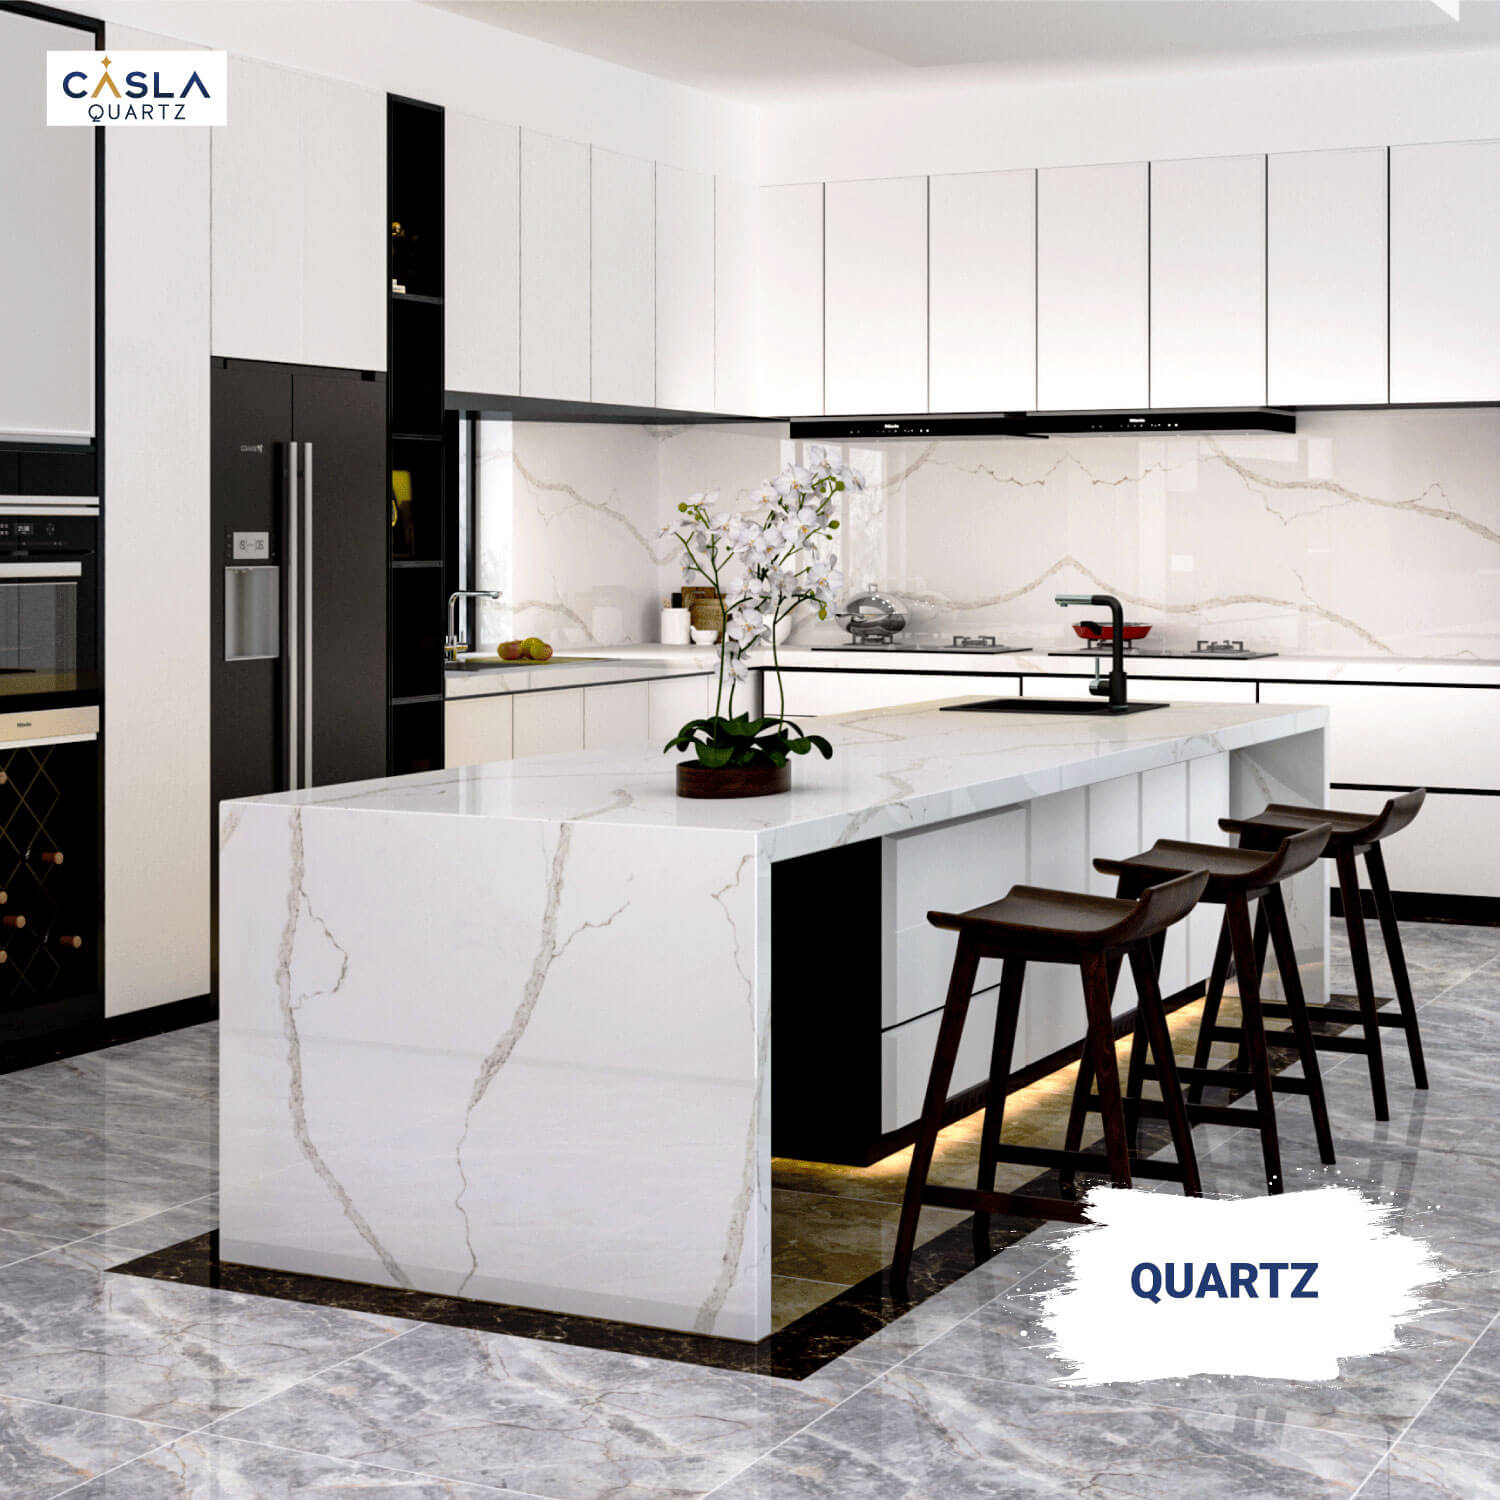 Types-of-stone -suitable-for- modern-kitchen -space-3.jpg